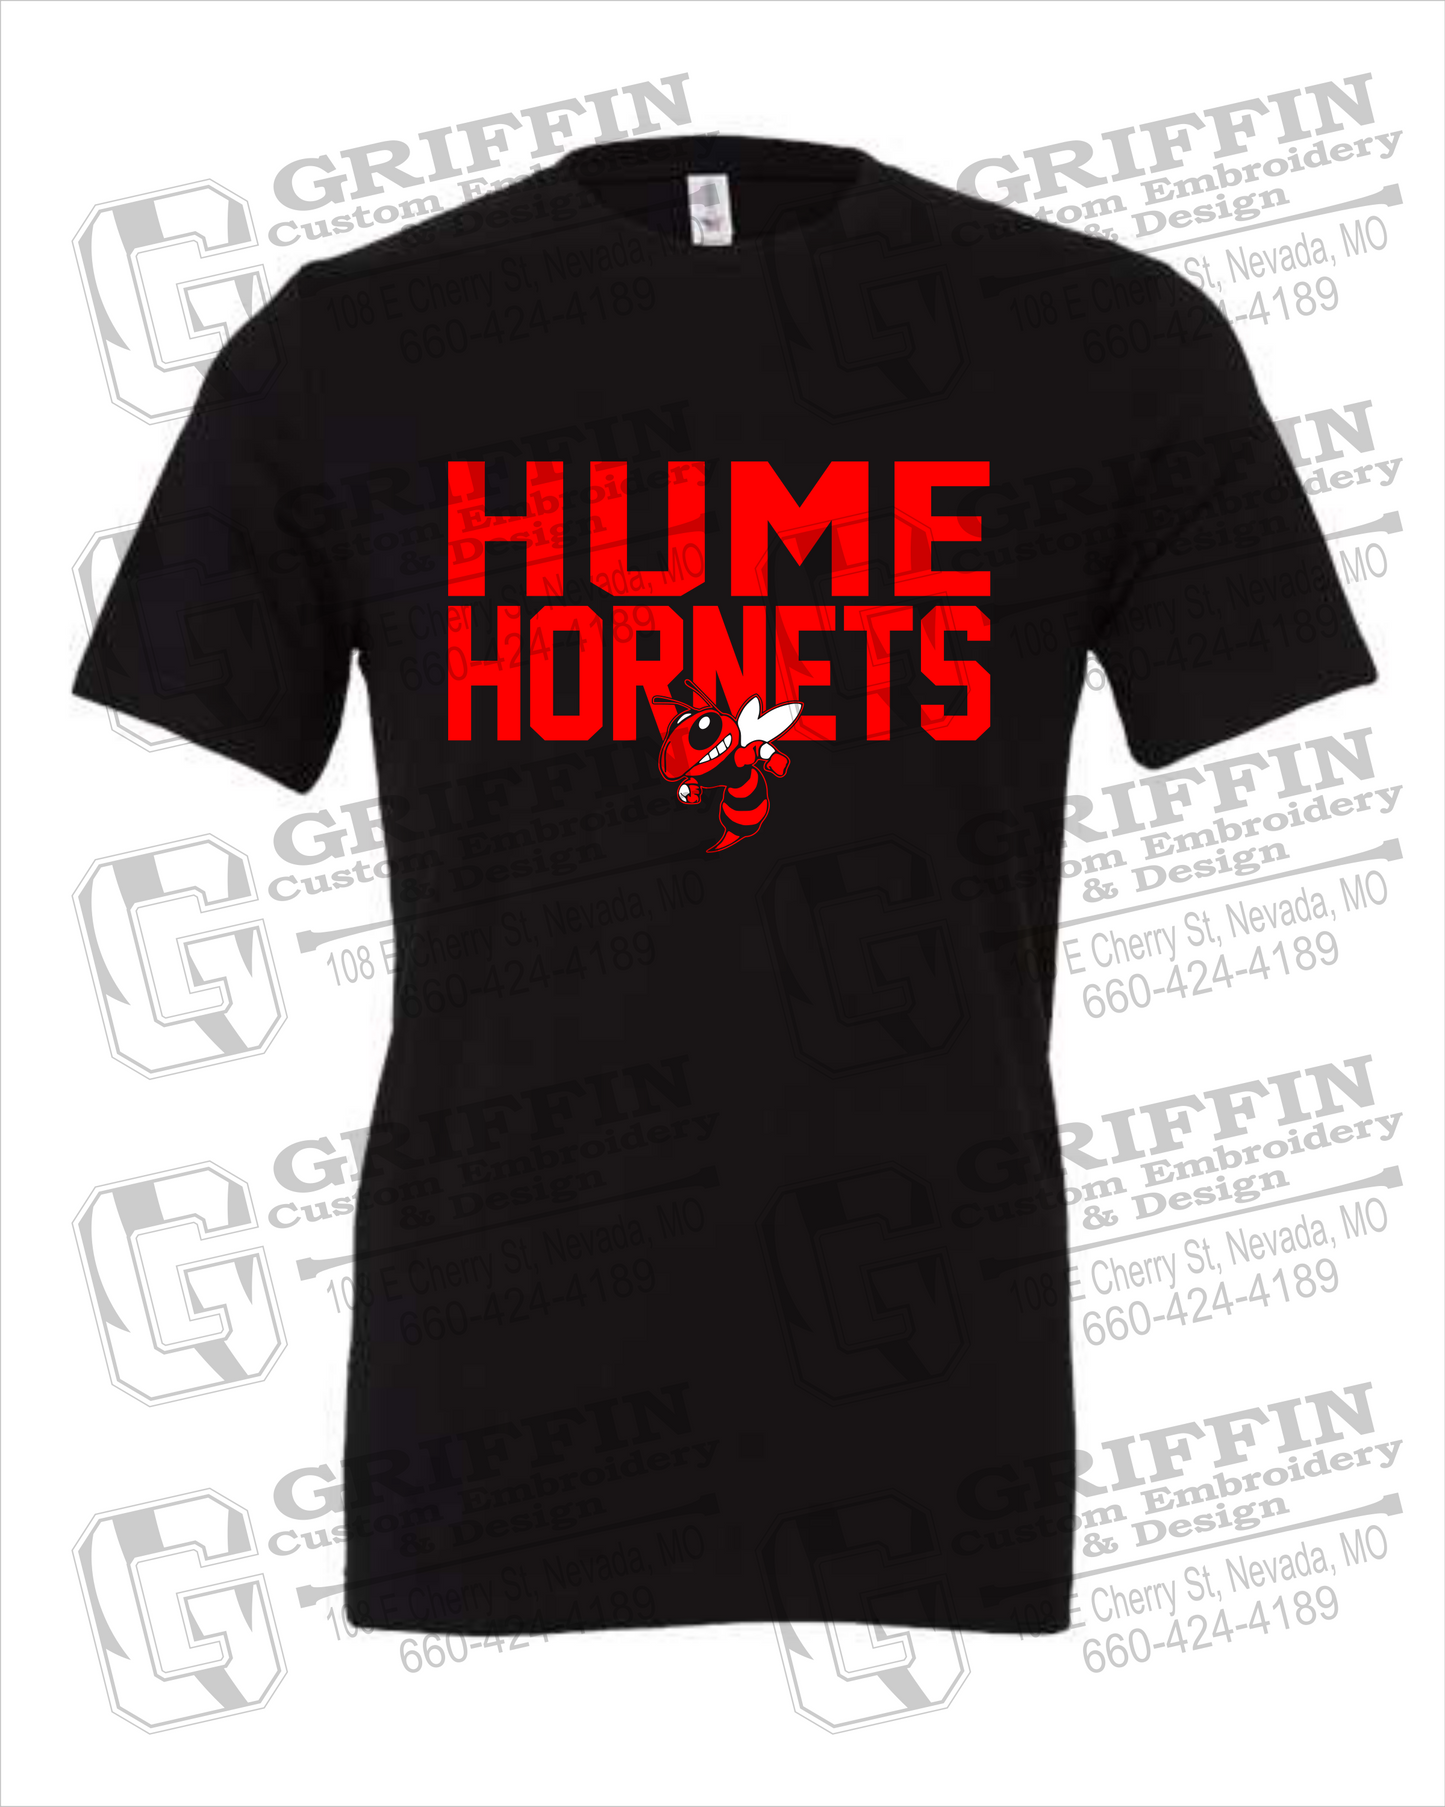 Hume Hornets 23-F 100% Cotton Short Sleeve T-Shirt